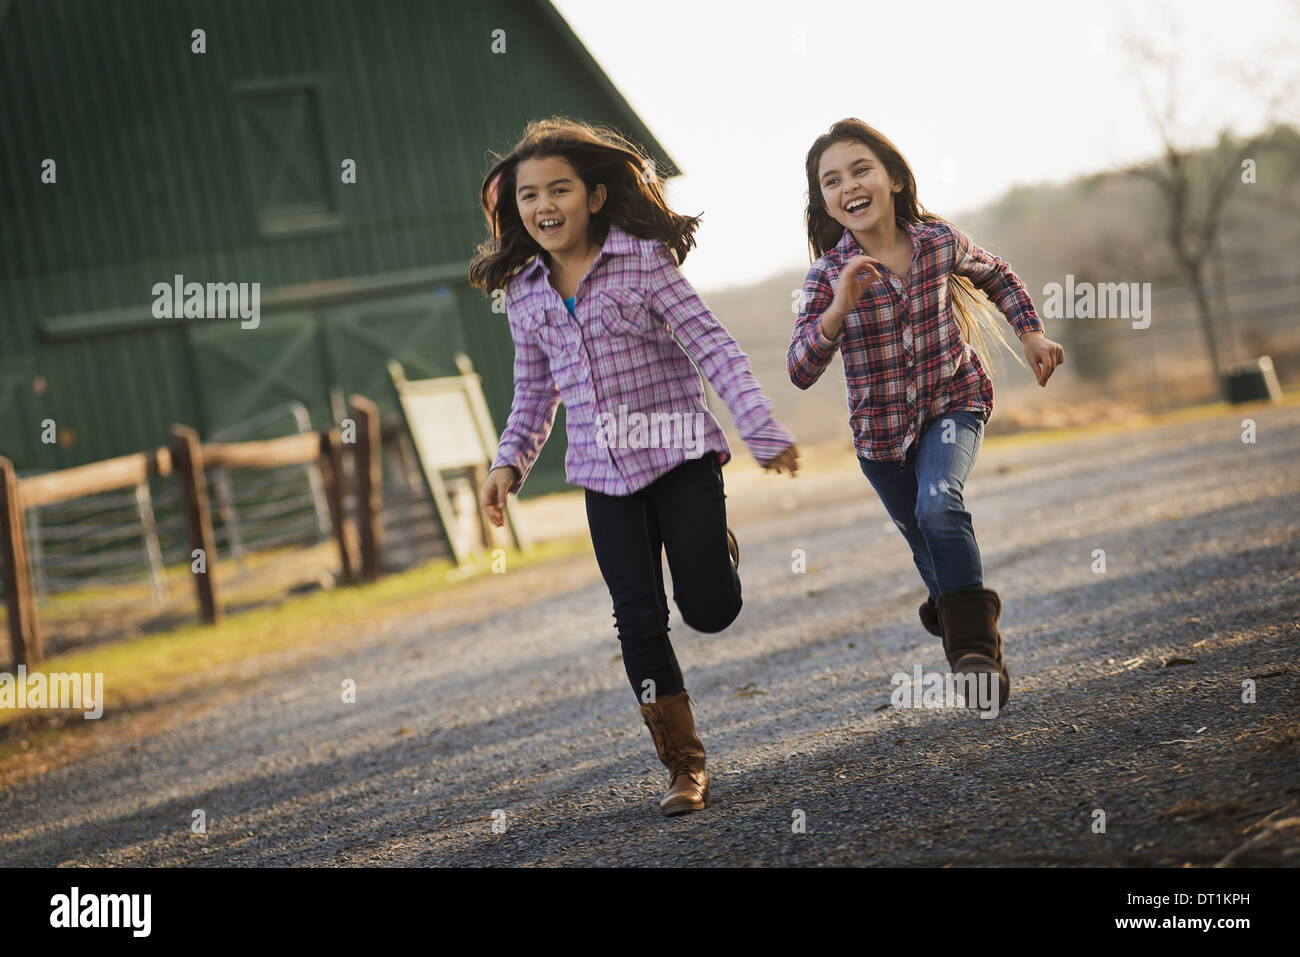 Two children running along a road by a farm building on an organic farm Stock Photo